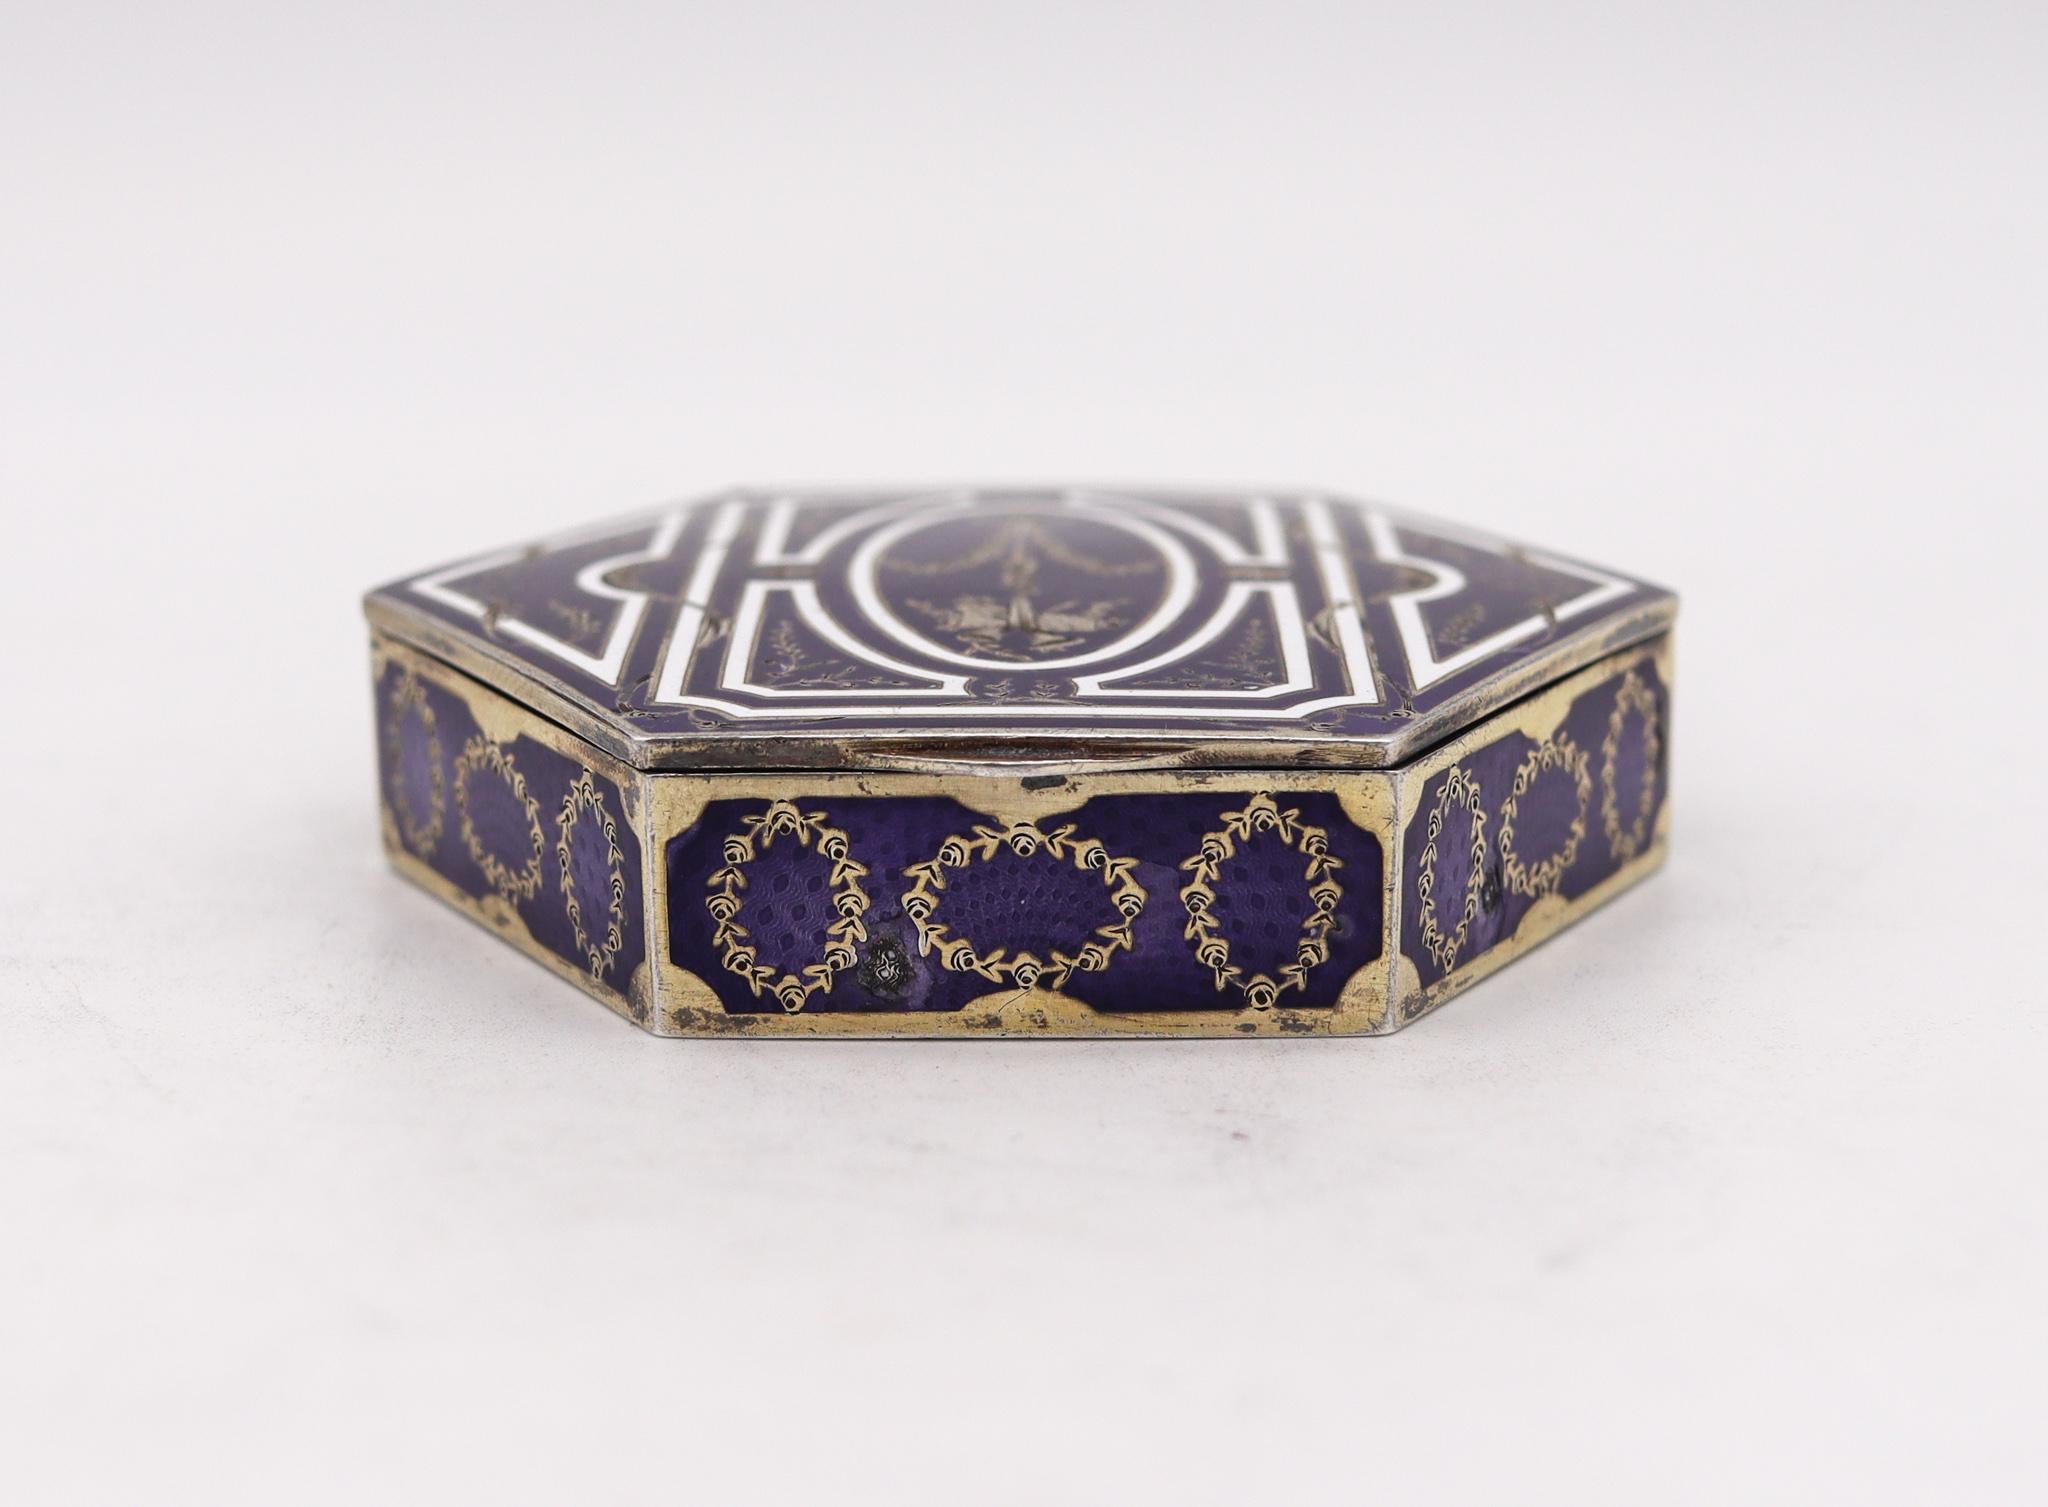 French 1905 Edwardian Hexagonal Snuff Box Sterling Silver with Guilloche Enamel For Sale 4